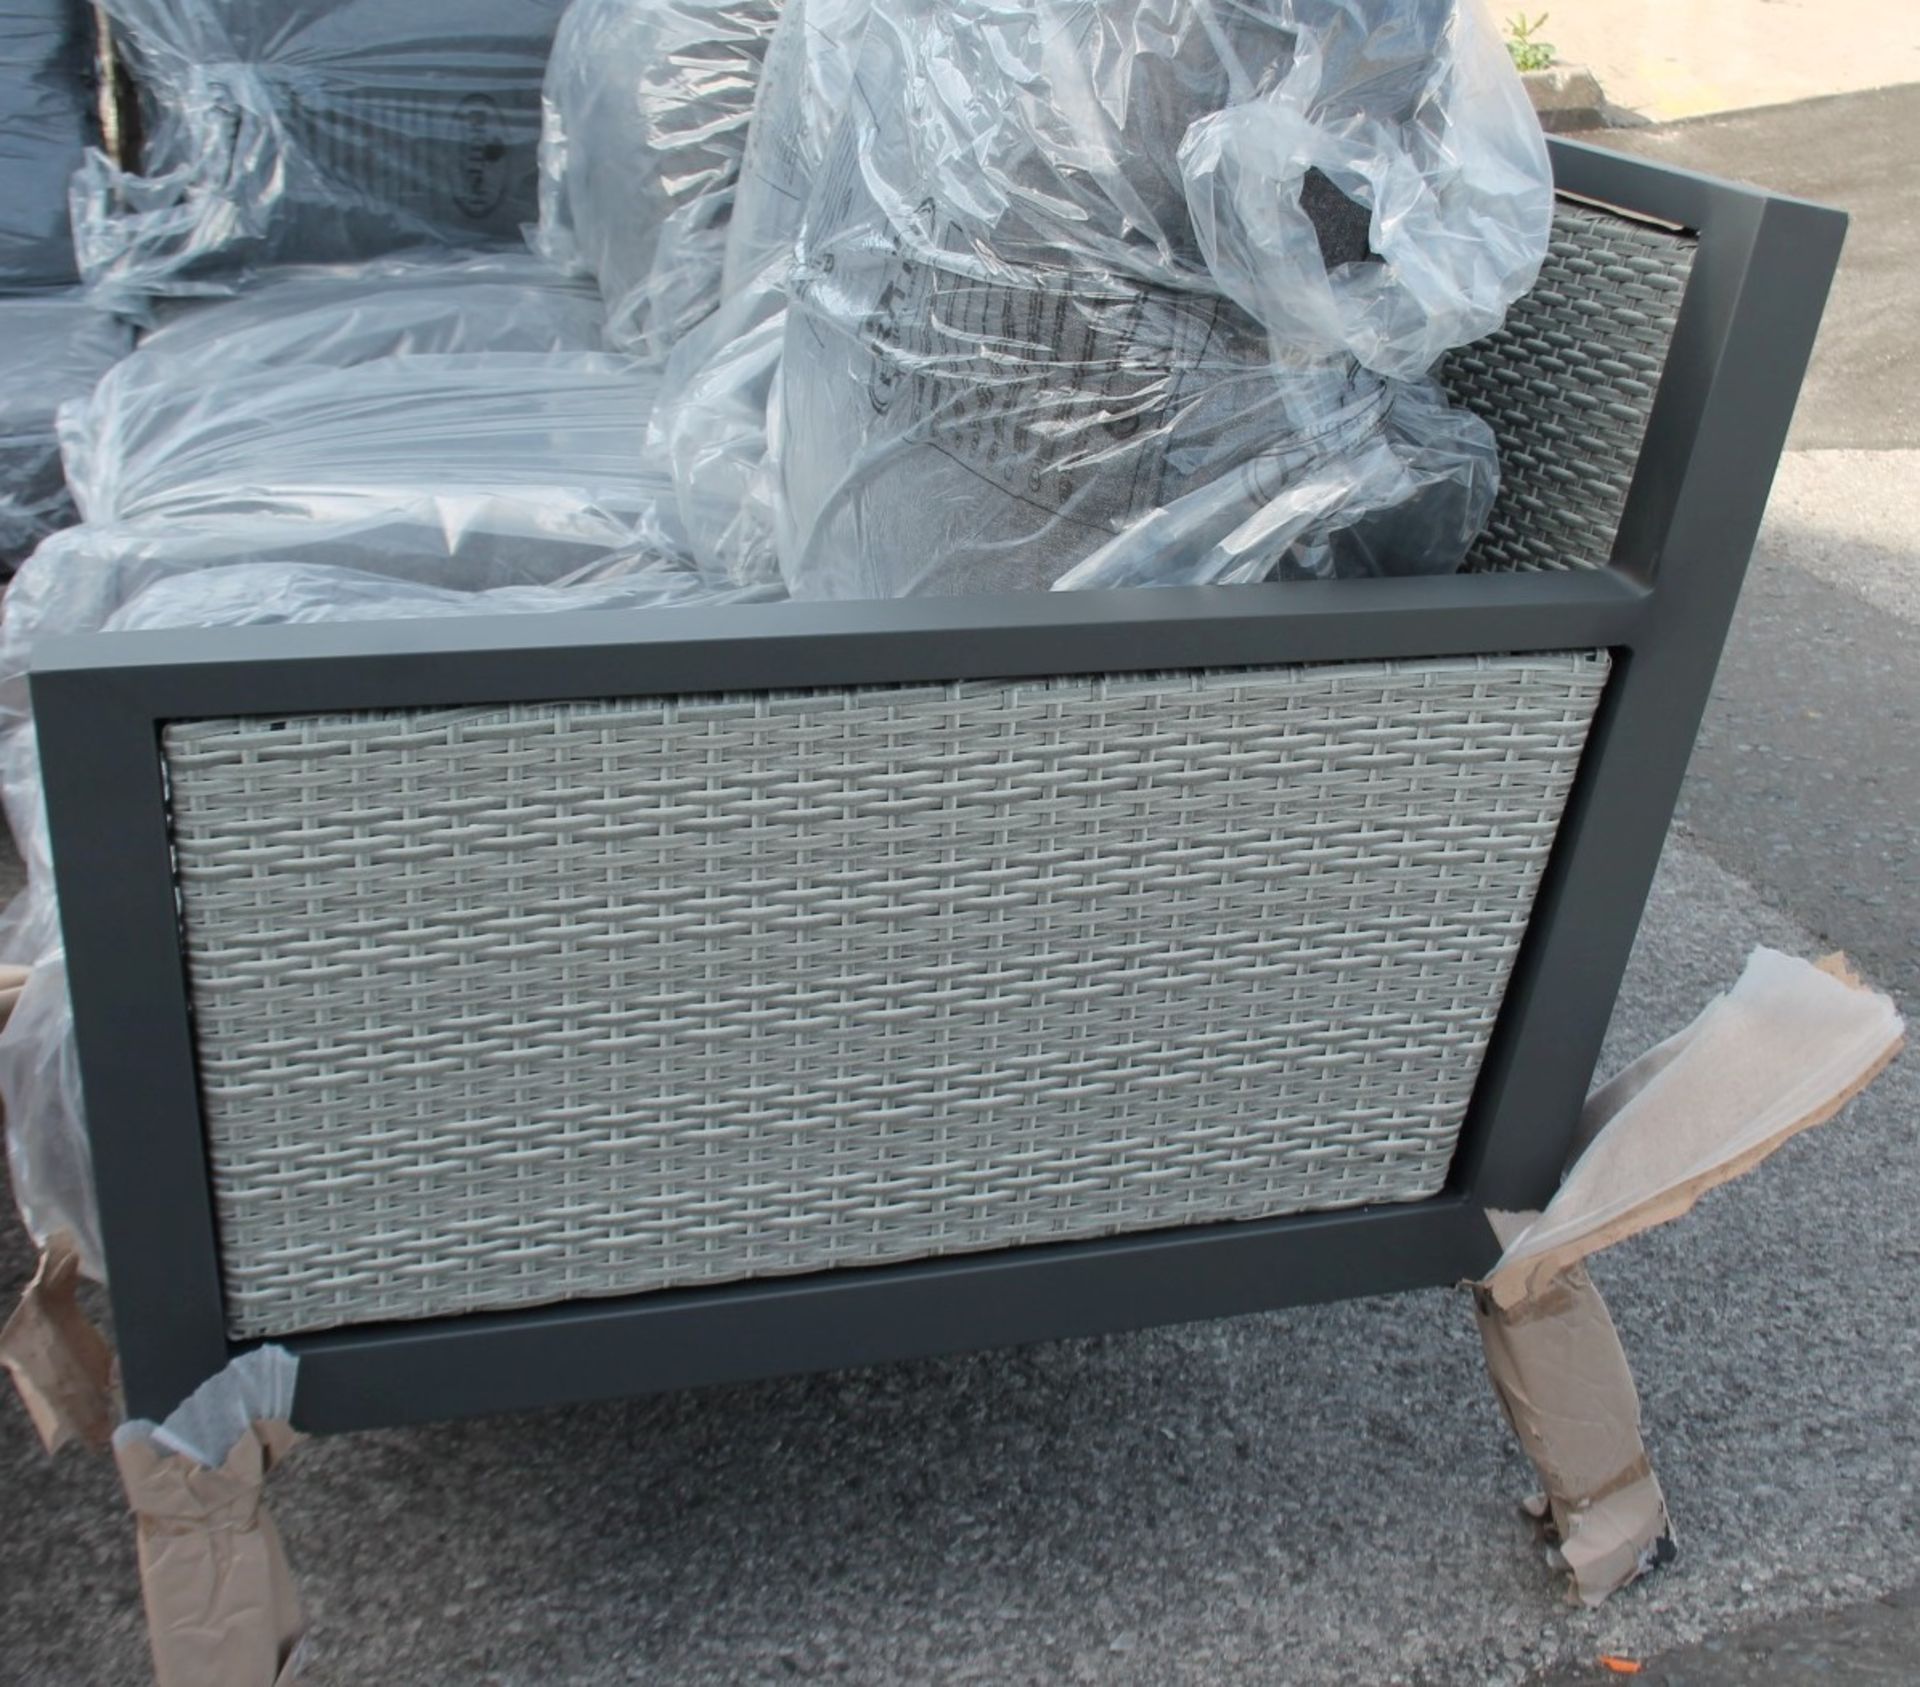 1 x HARTMANN 'Nouveau Square' Firepit Garden Furniture Set With Corner Sofa - New/Boxed - RRP £3,299 - Image 13 of 21